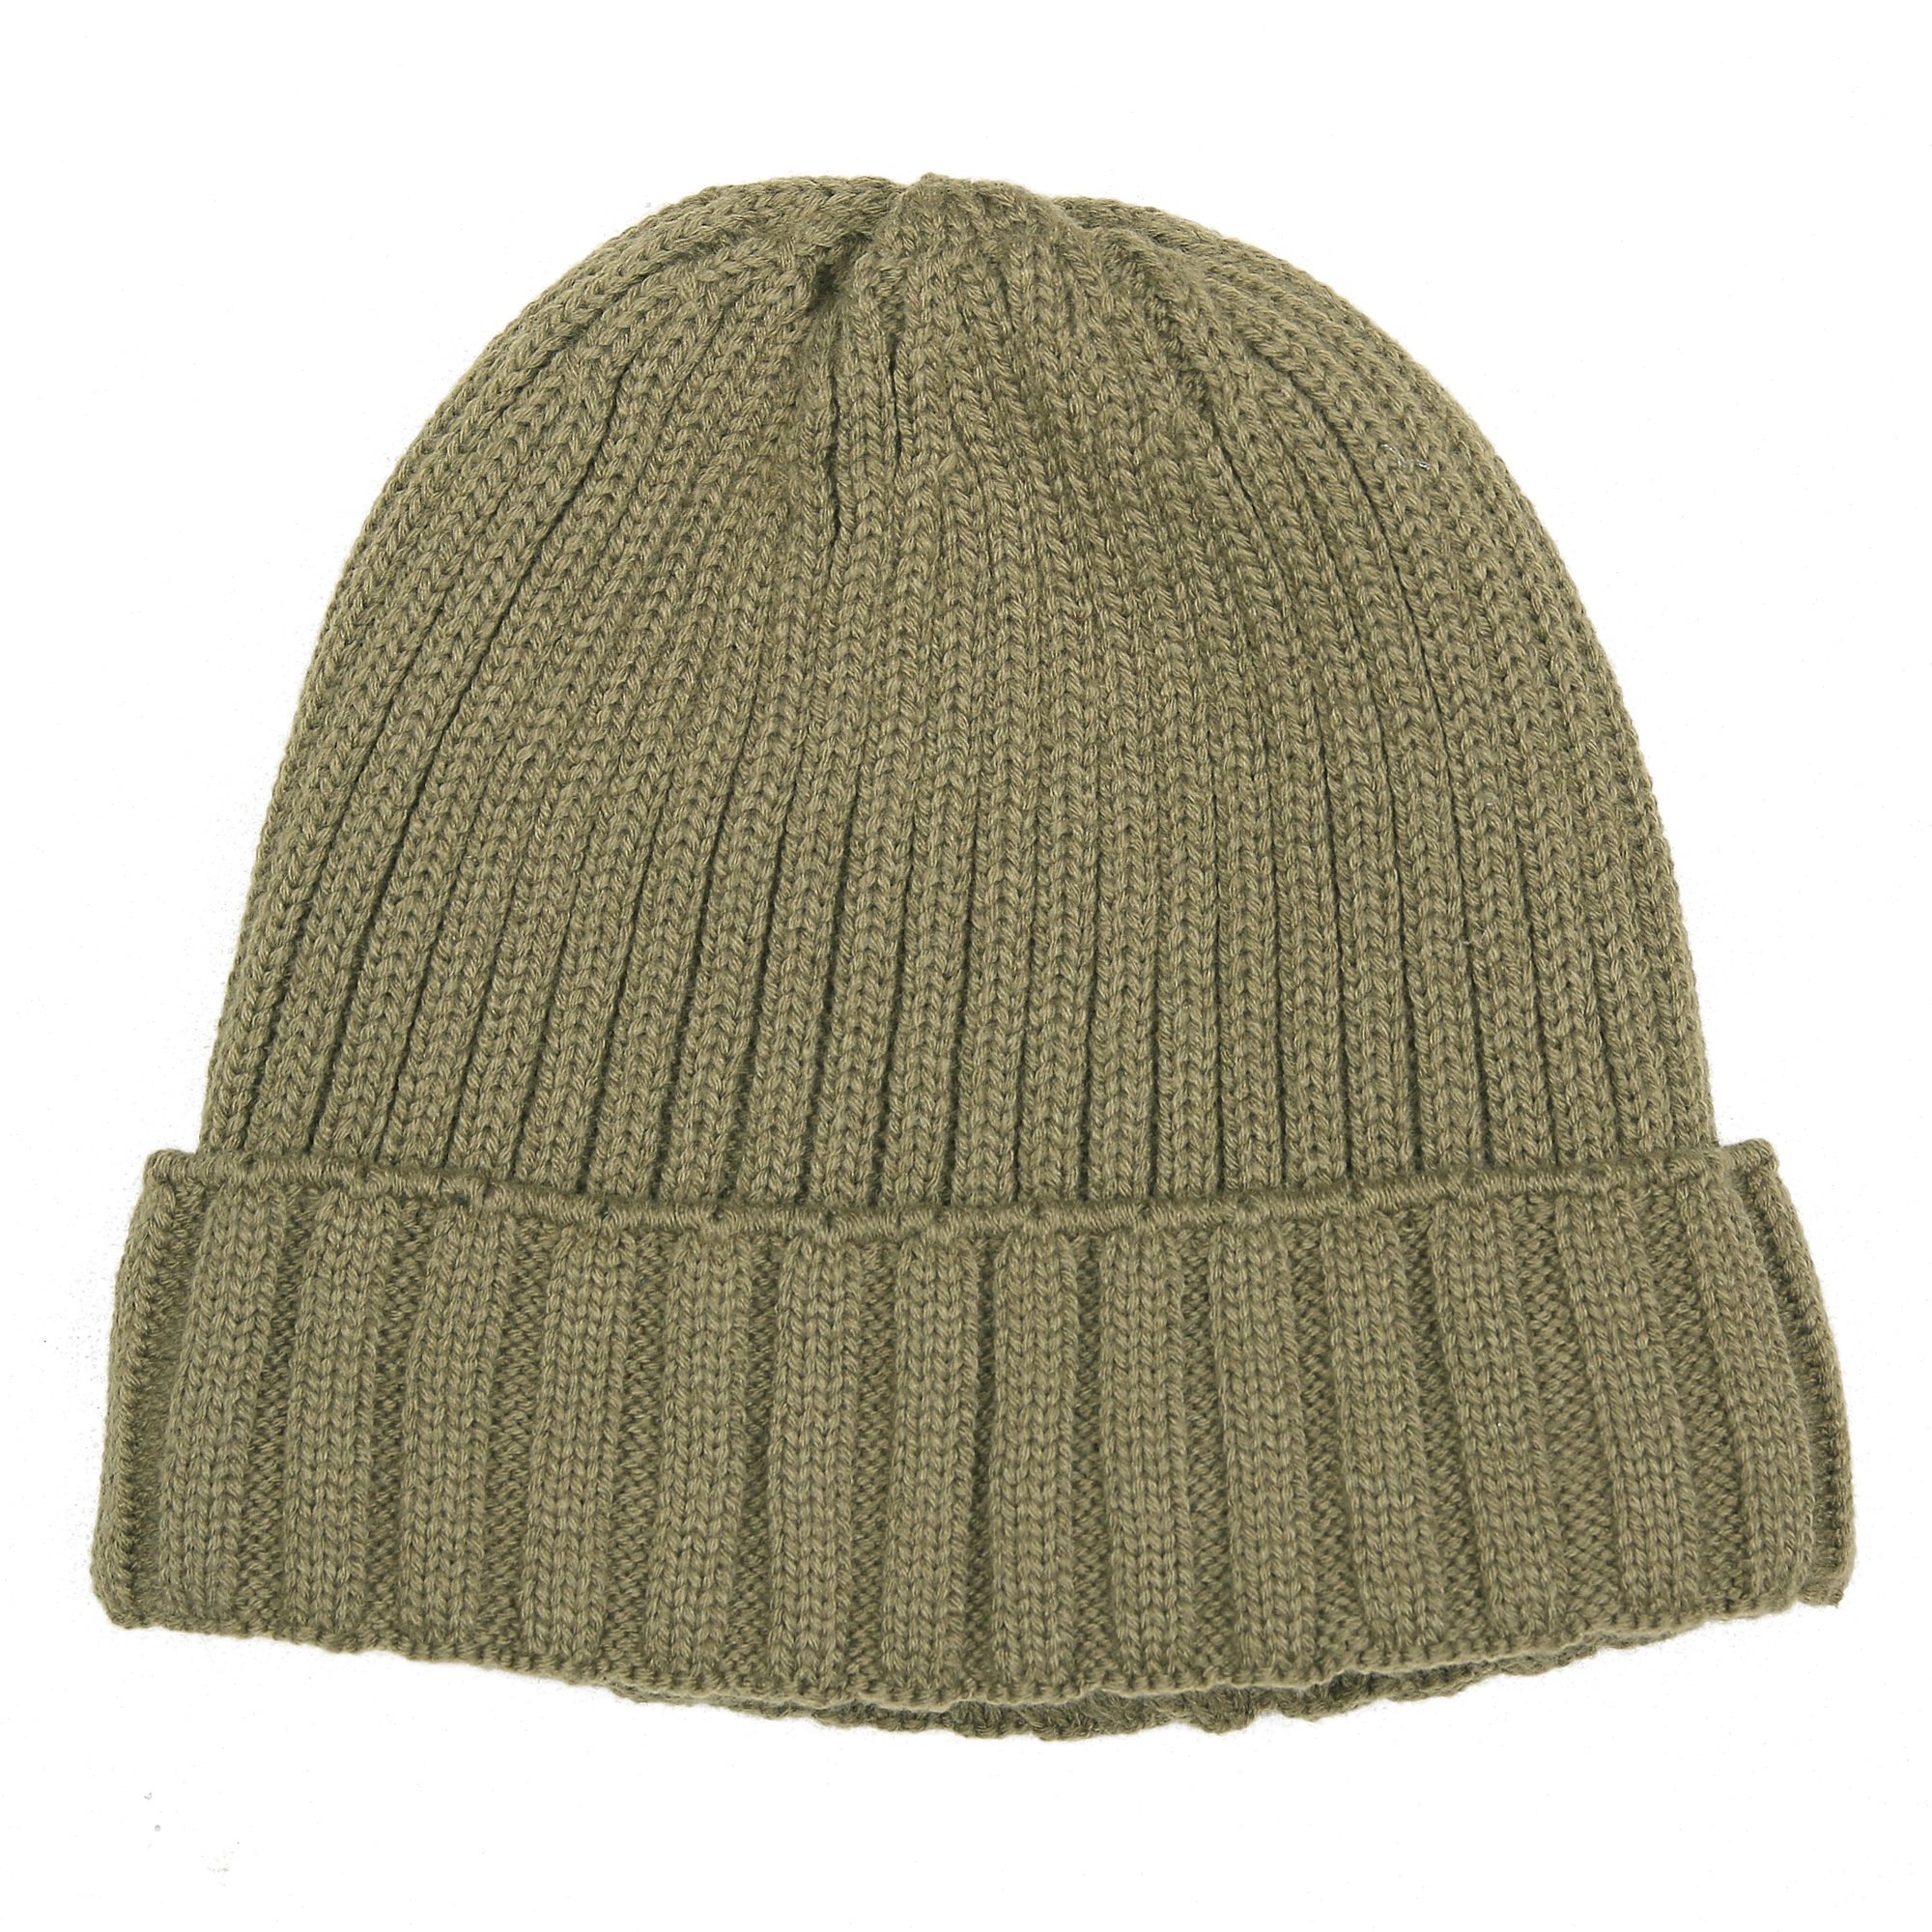 Knitted hat EXTREME BEANIE with insulation OLIV  214318-OD L-11